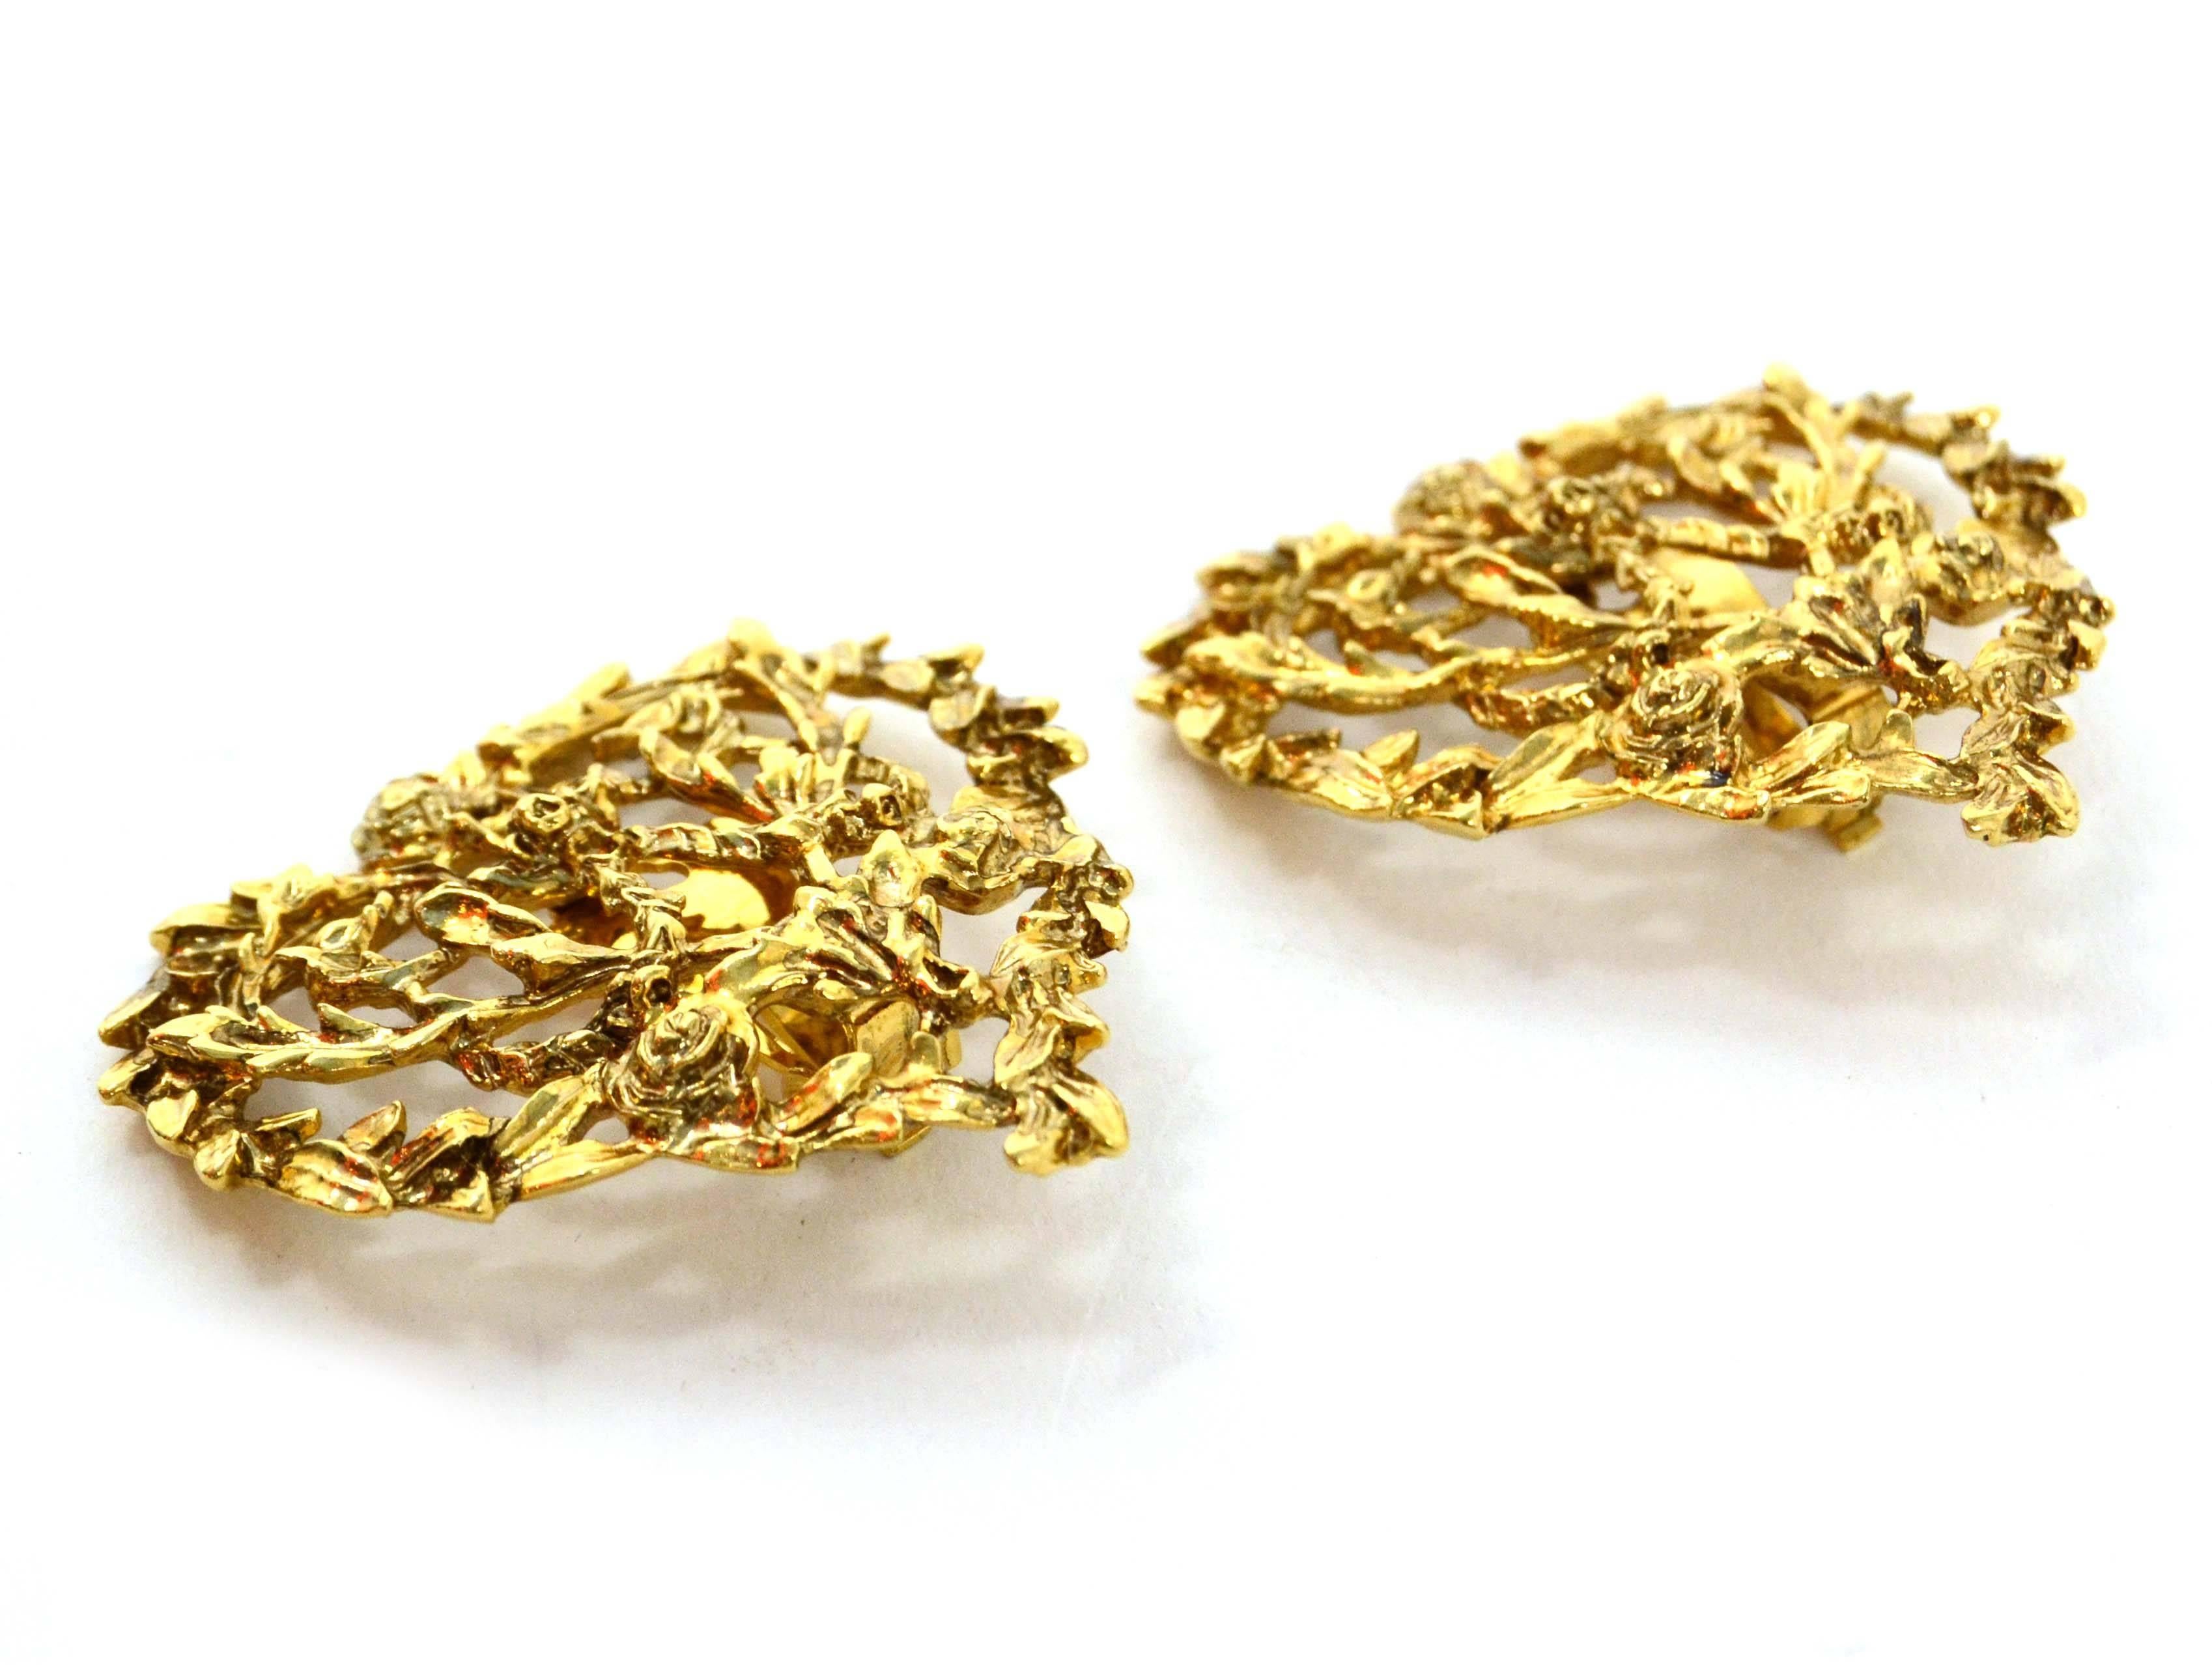 Yves Saint Laurent YSL Gold Heart Clip On Earrings
Features roses intricately designed throughout
Color: Goldtone
Materials: Metal
Closure: Clip no
Stamp: YSL
Overall Condition: Excellent pre-owned condition
Measurements: 
Length: 2